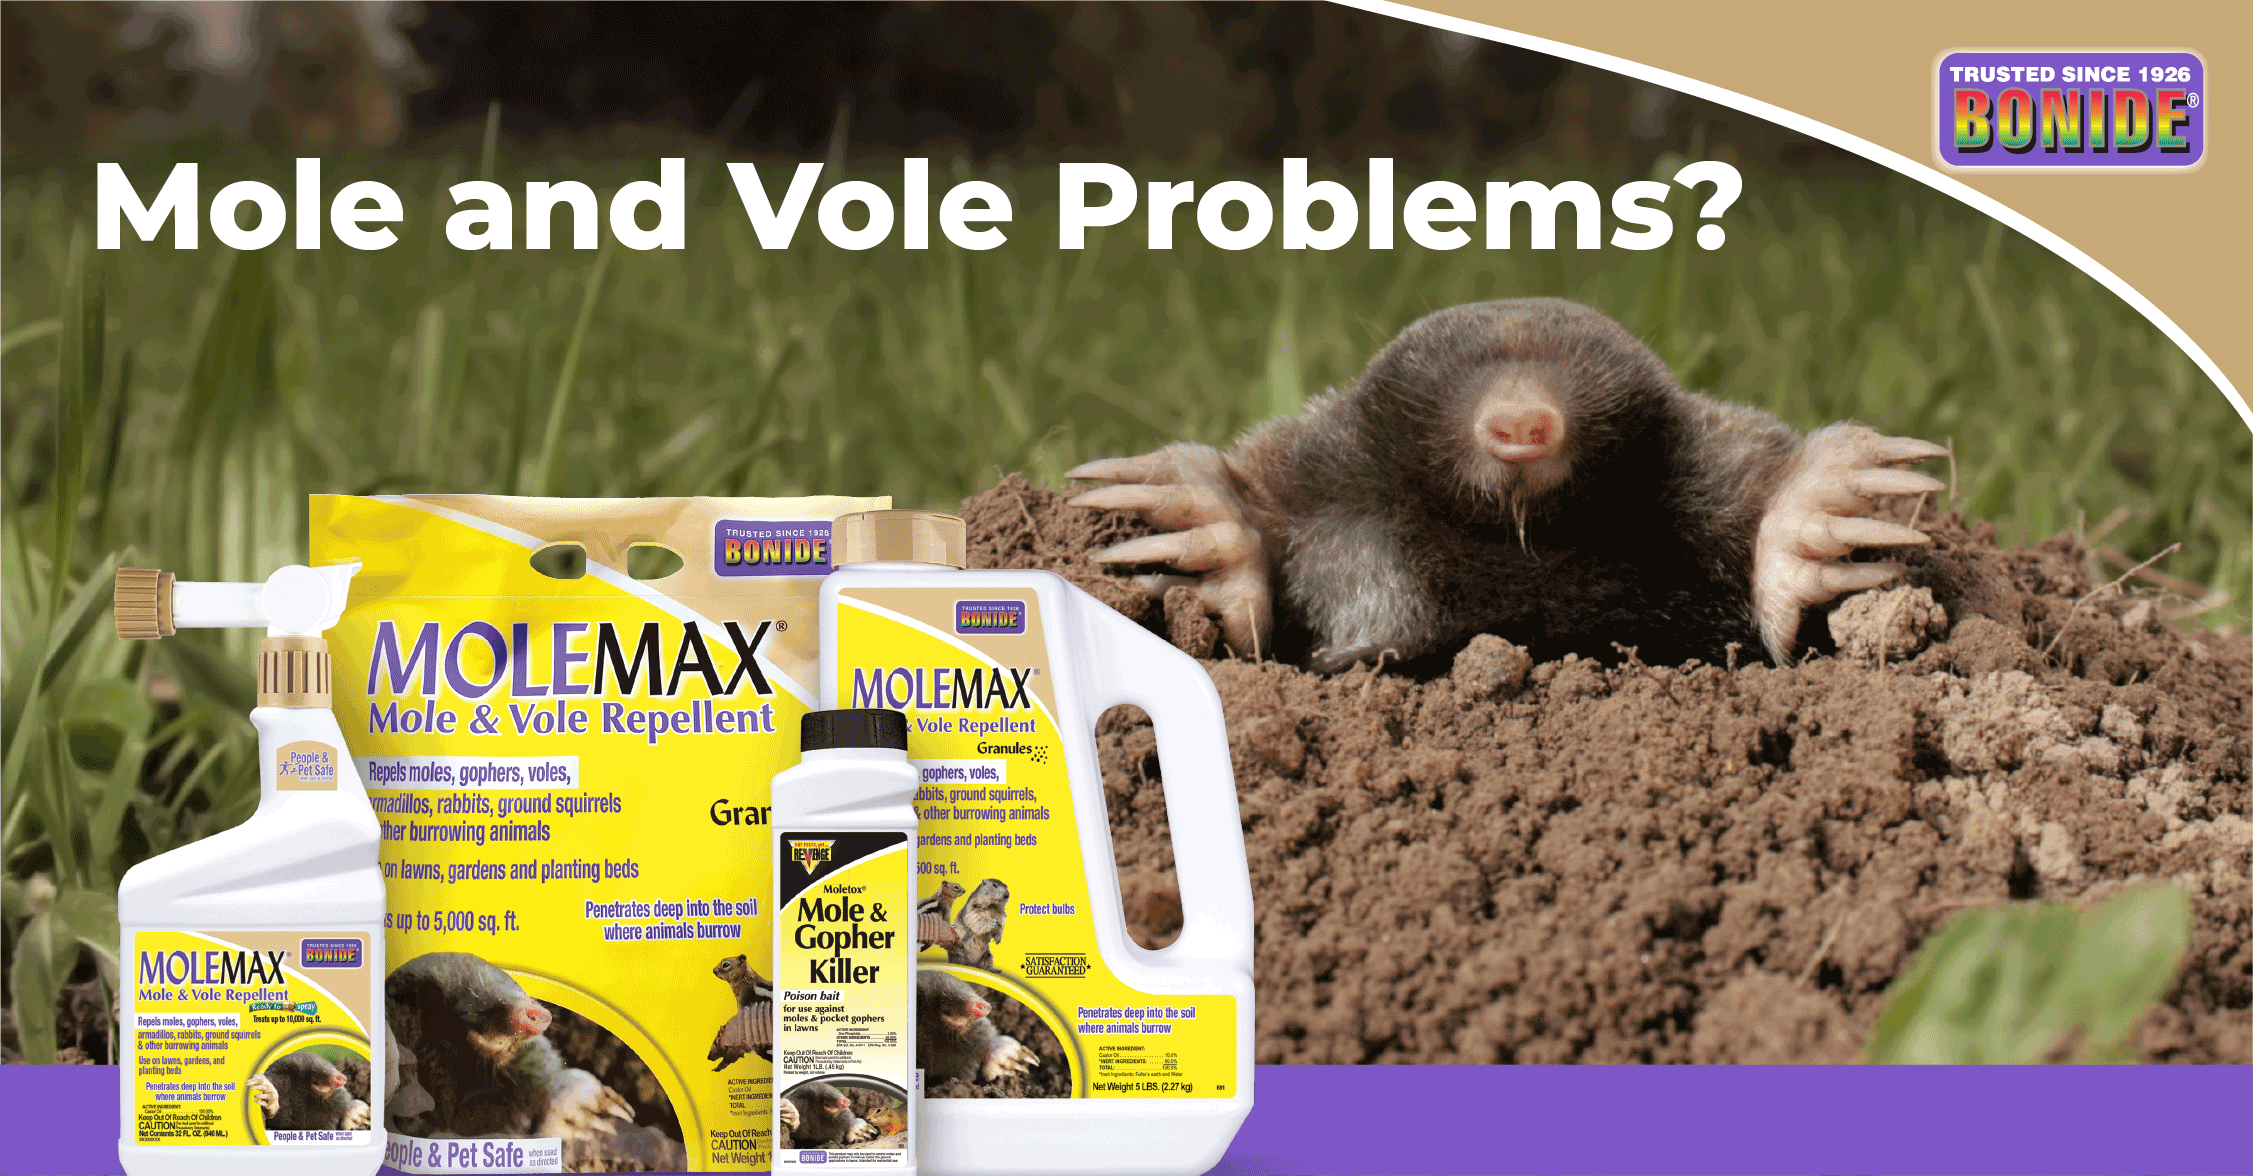 Mole and Vole Problems - Look to MoleMax